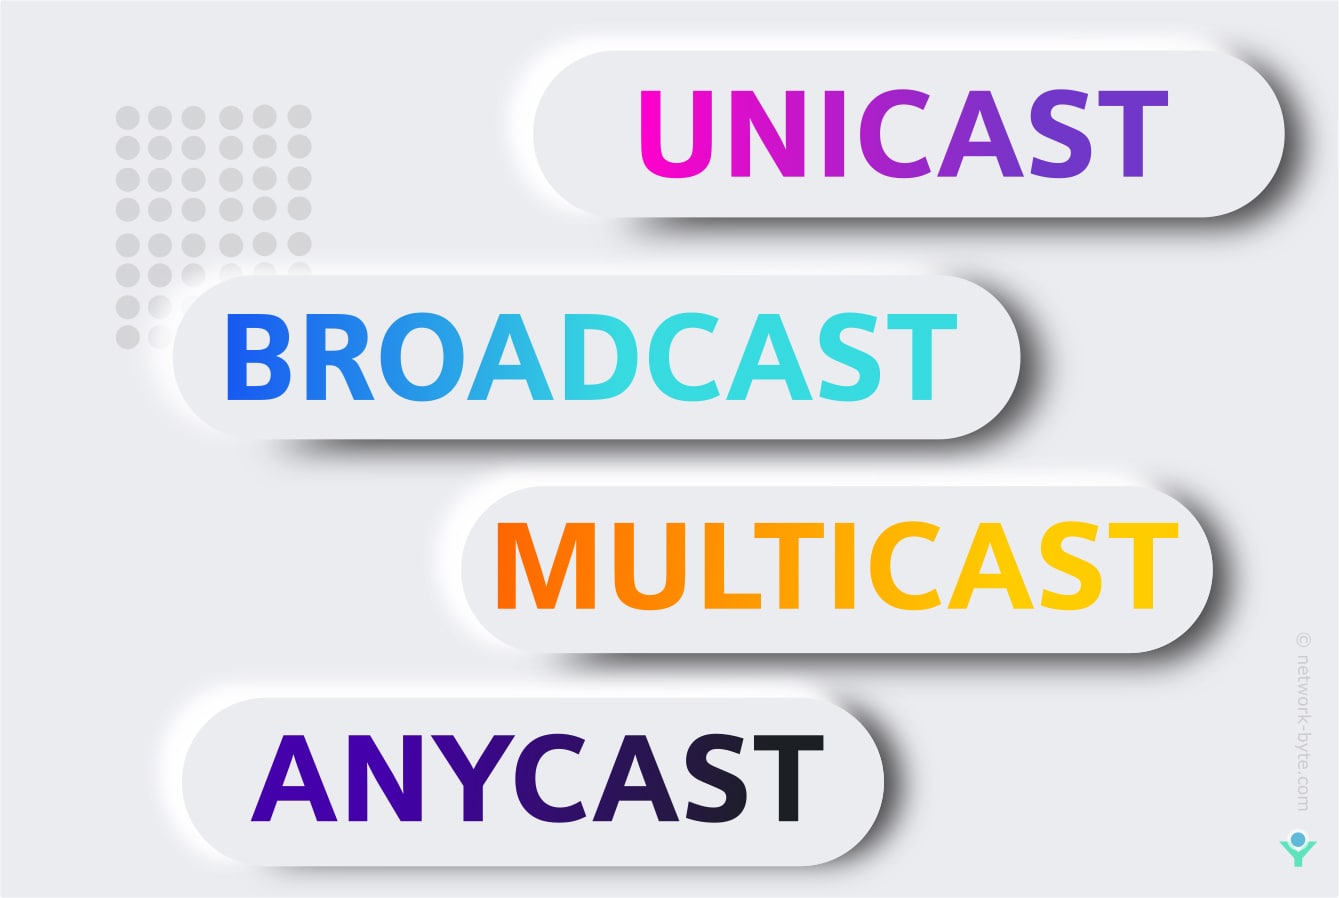 Unicast-Broadcast-Multicast-Anycast
<span class="bsf-rt-reading-time"><span class="bsf-rt-display-label" prefix="Reading Time"></span> <span class="bsf-rt-display-time" reading_time="6"></span> <span class="bsf-rt-display-postfix" postfix="mins"></span></span><!-- .bsf-rt-reading-time -->